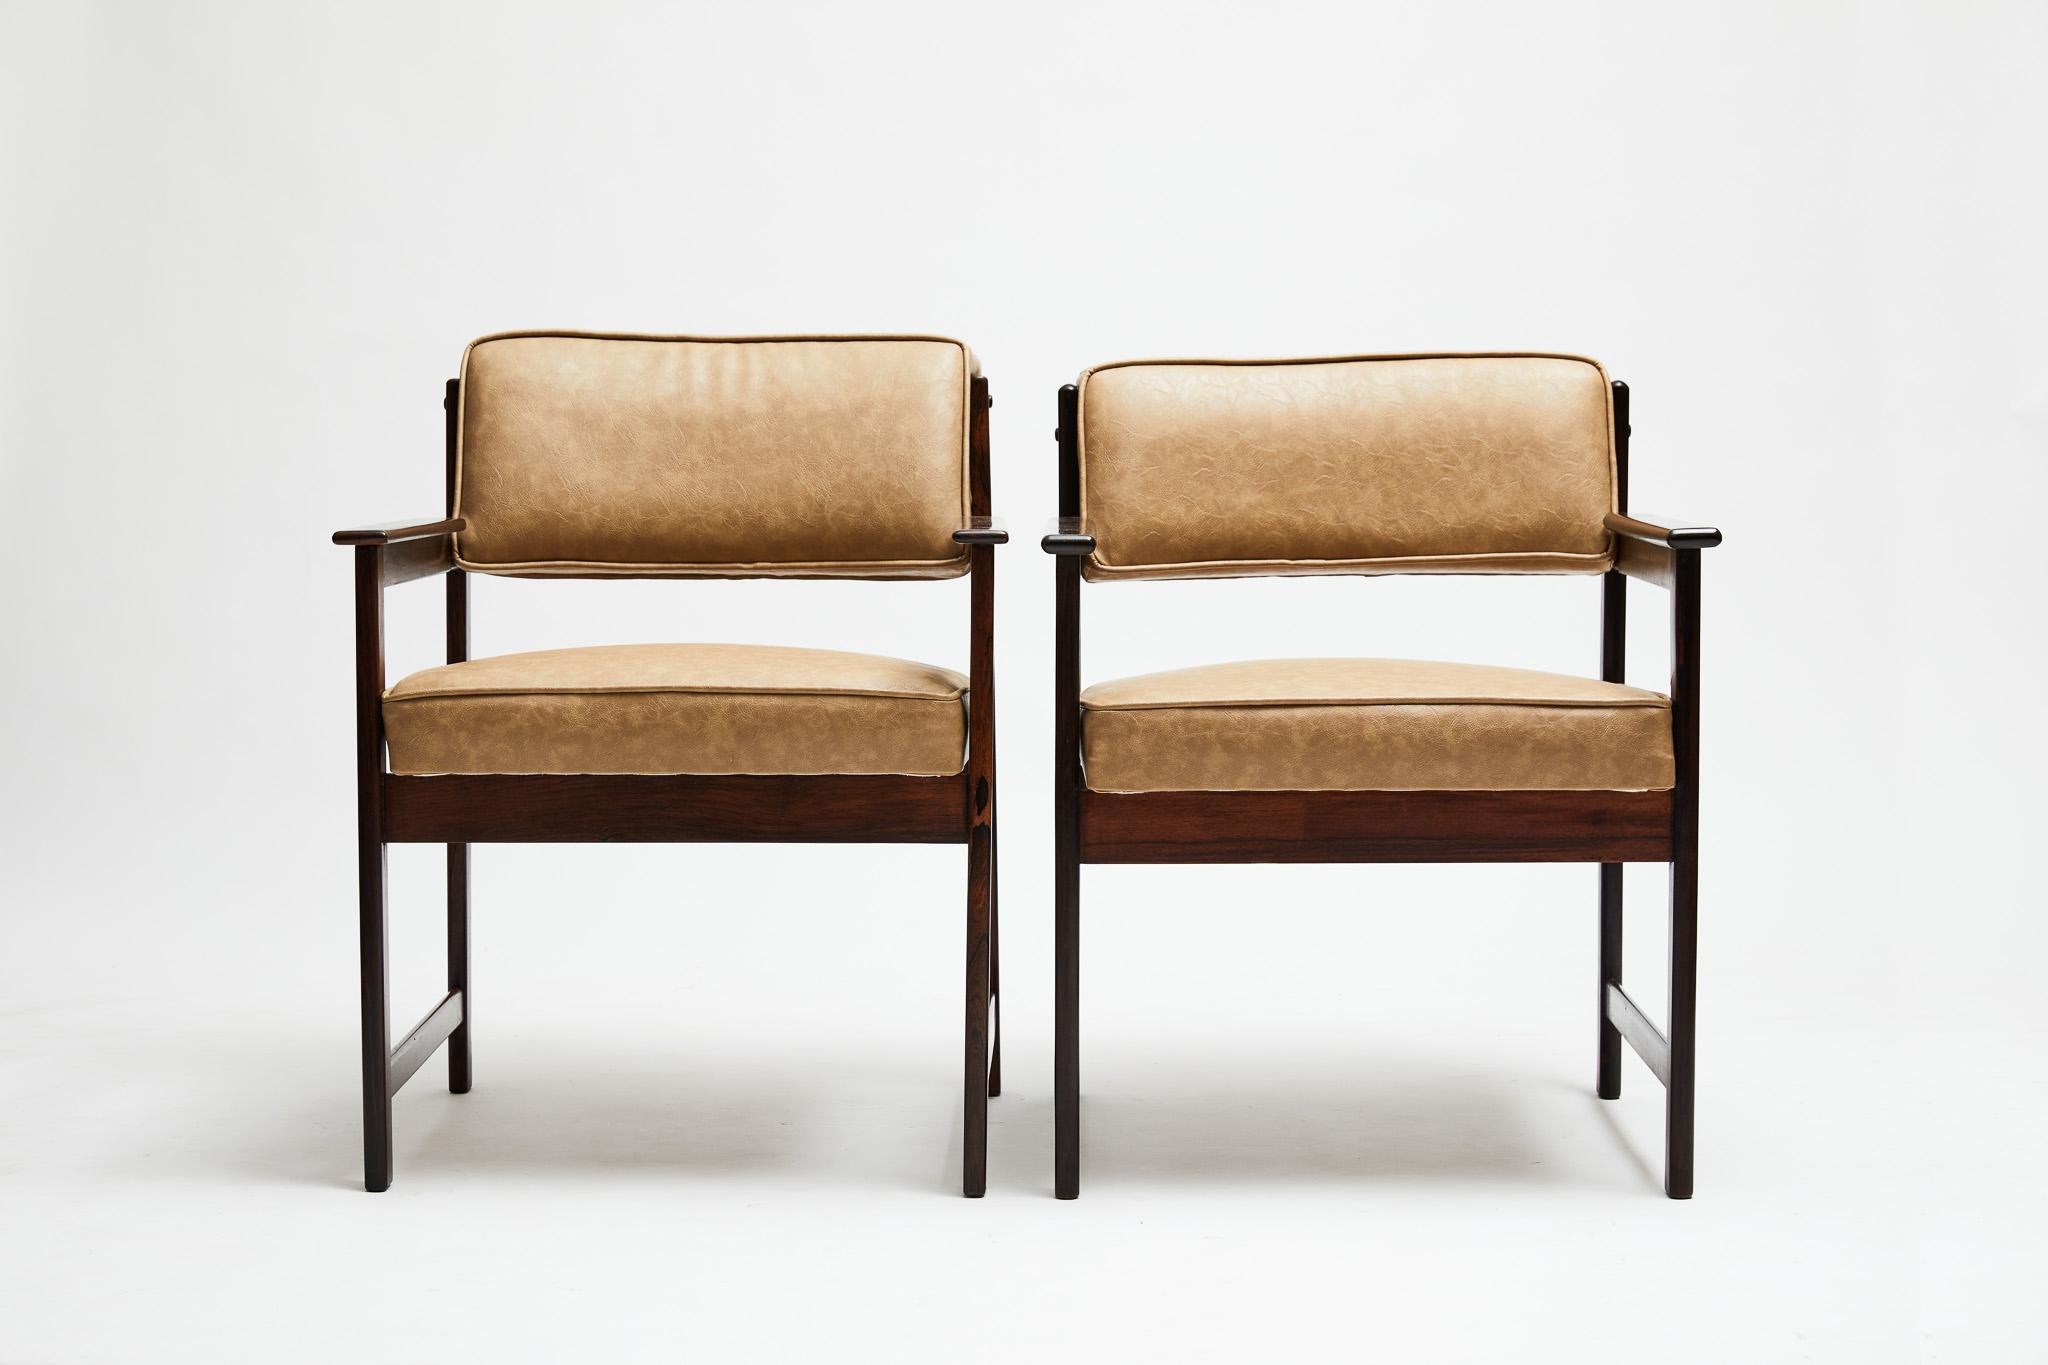 Available now, these Brazilian Modern armchairs in hardwood & beige faux leather are gorgeous!

These gems were designed by Jorge Jabour Mauad and executed by Cantù Móveis e Interiores Ltda. in the 1960s. The structure looks like a perfect cube and